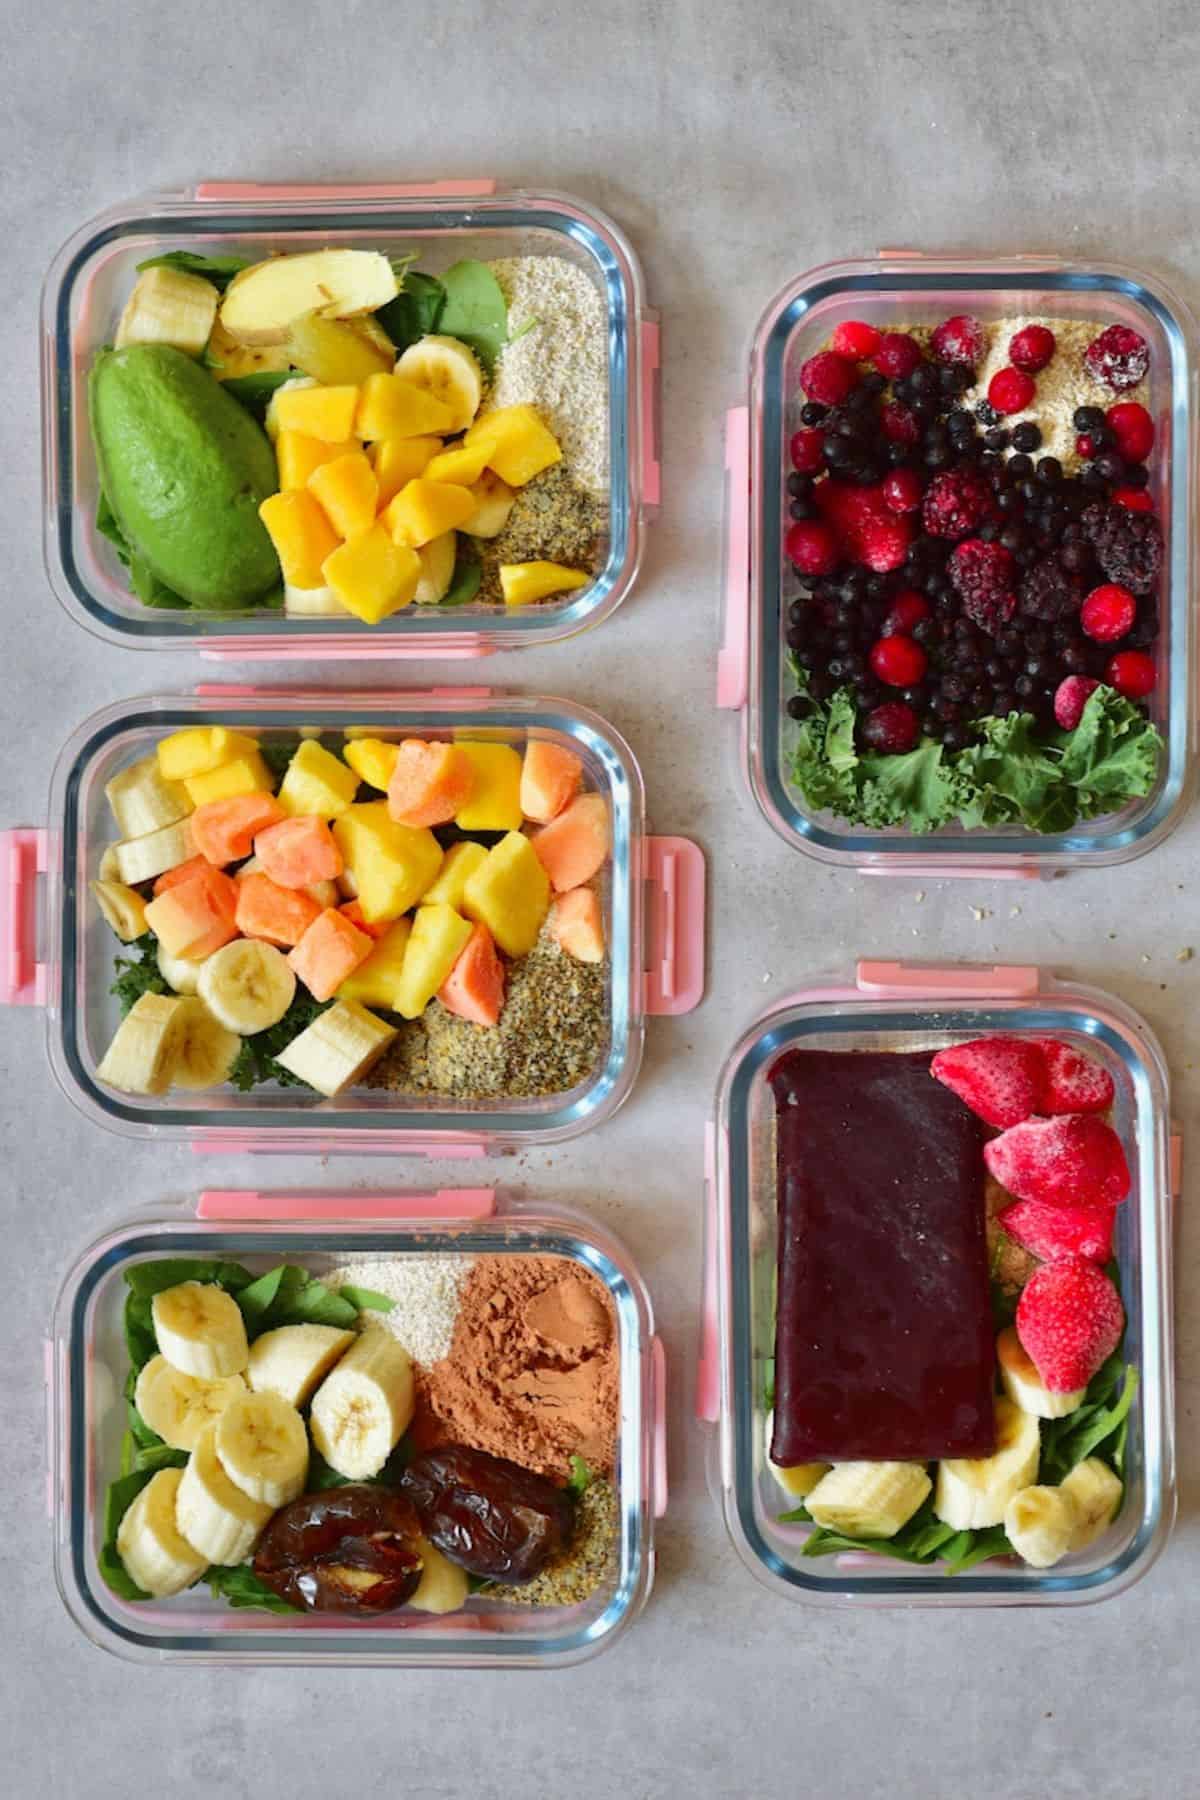 https://www.alphafoodie.com/wp-content/uploads/2021/12/Smoothies-meal-prep.jpeg